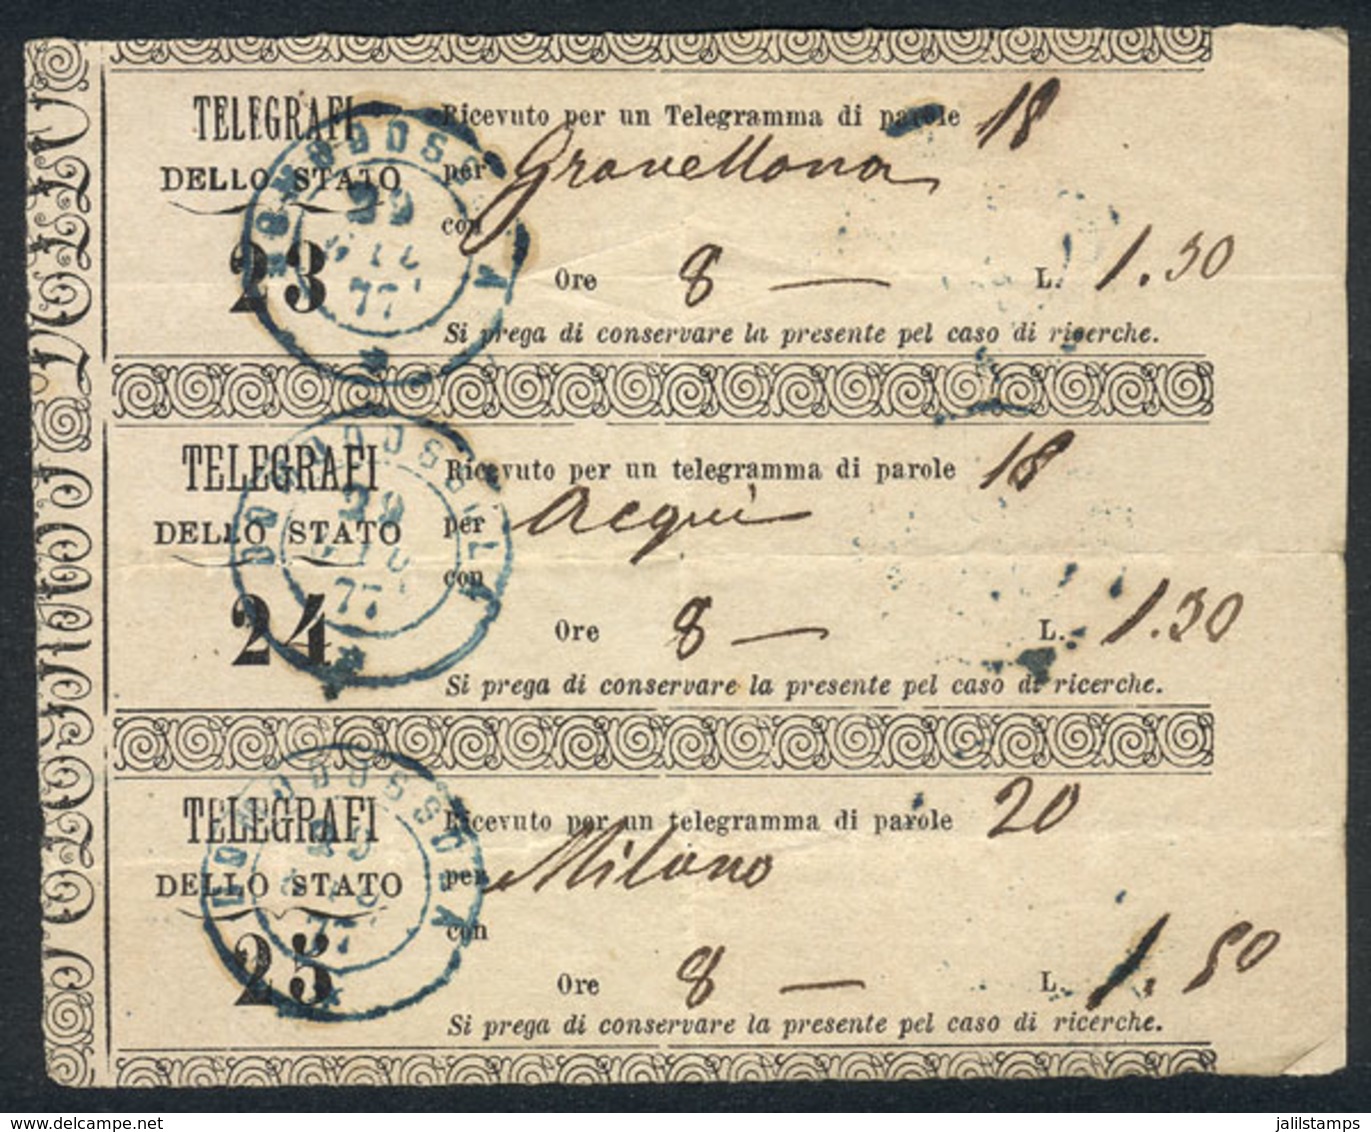 ITALY: 3 Receipts Of Telegrams Sent From DOMODOSSOLA To Different Towns On 29/JUL/1877, VF Quality, Rare! - Non Classificati